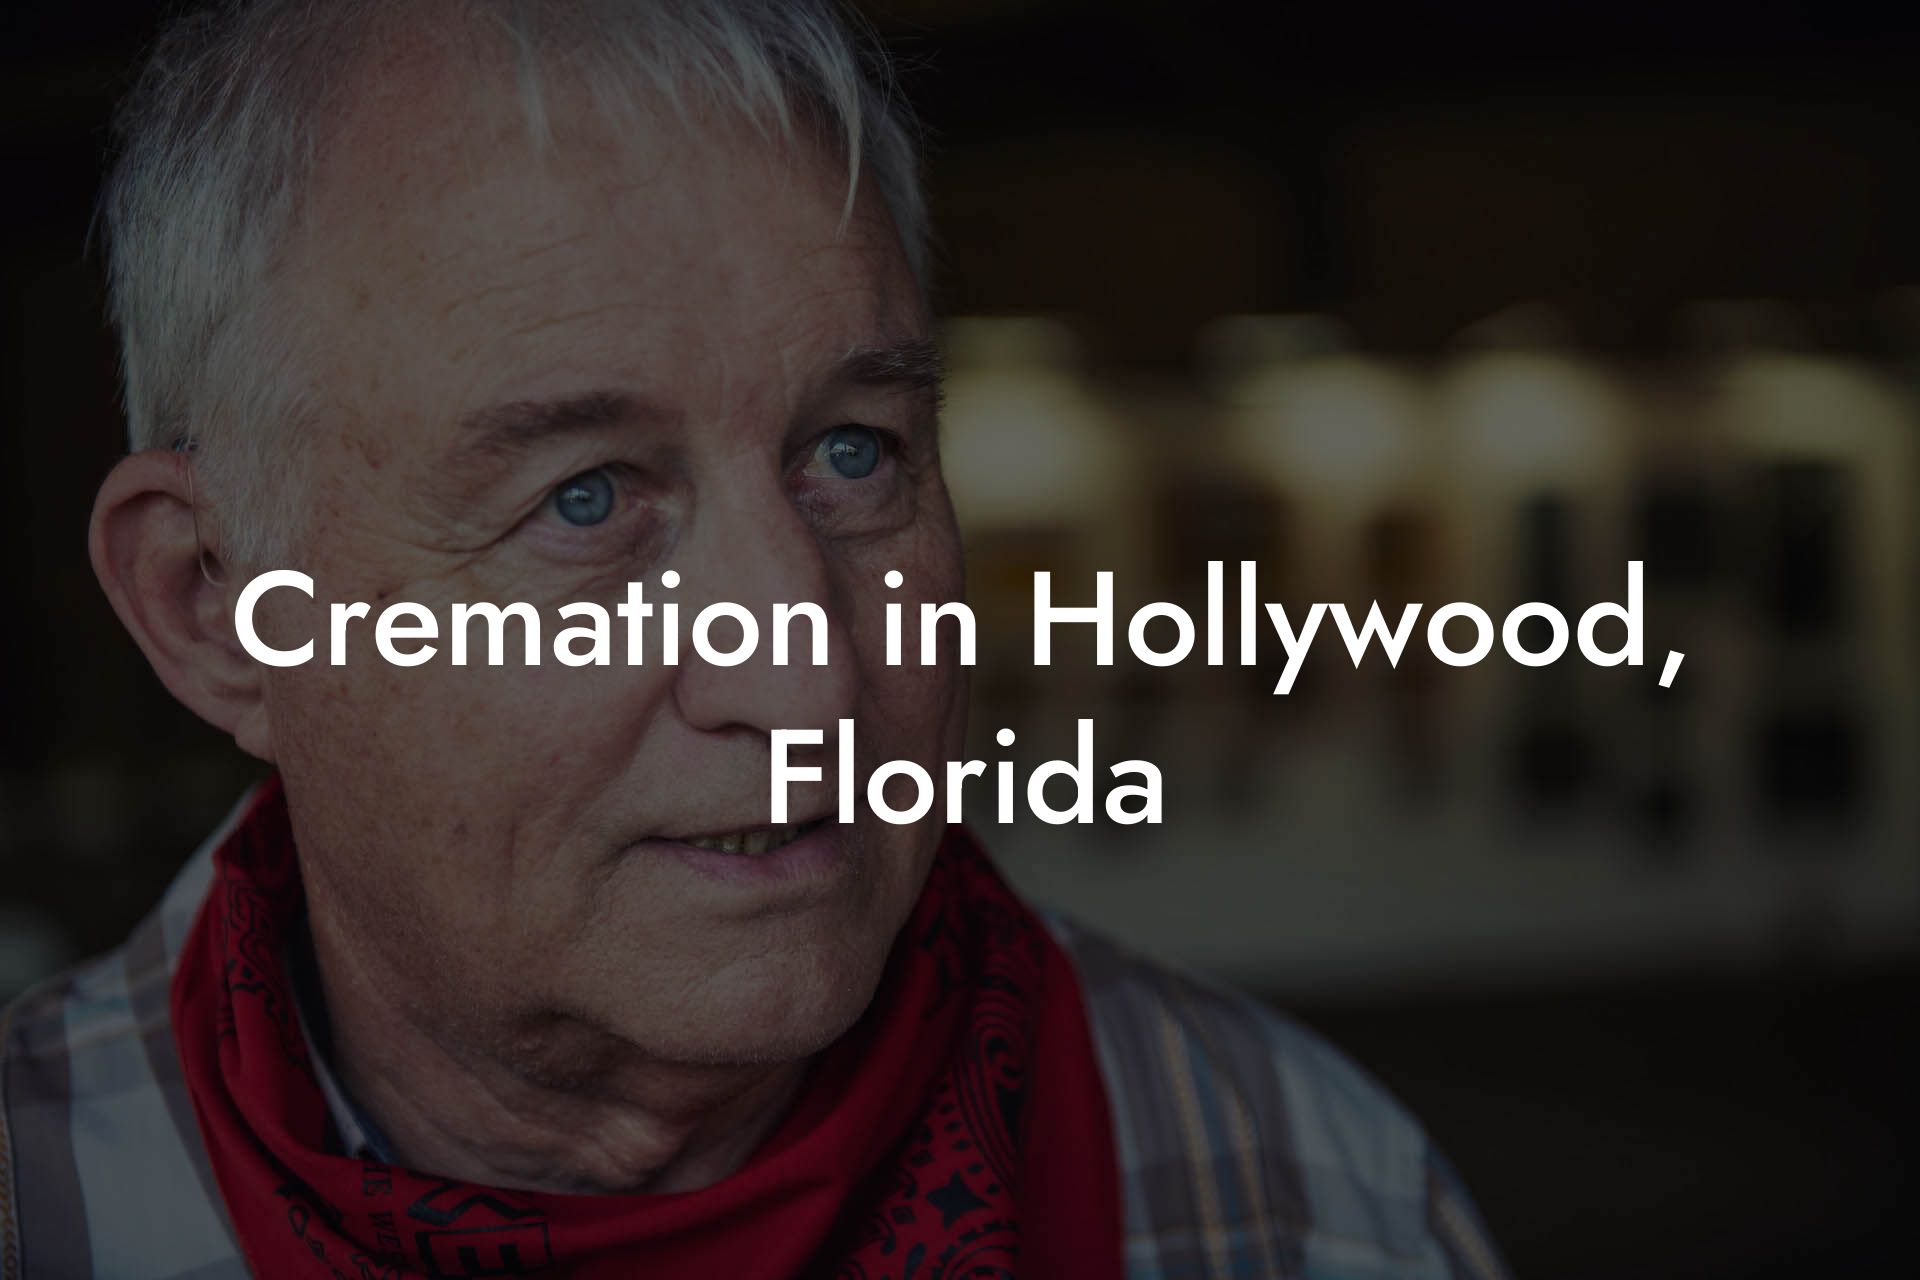 Cremation in Hollywood, Florida